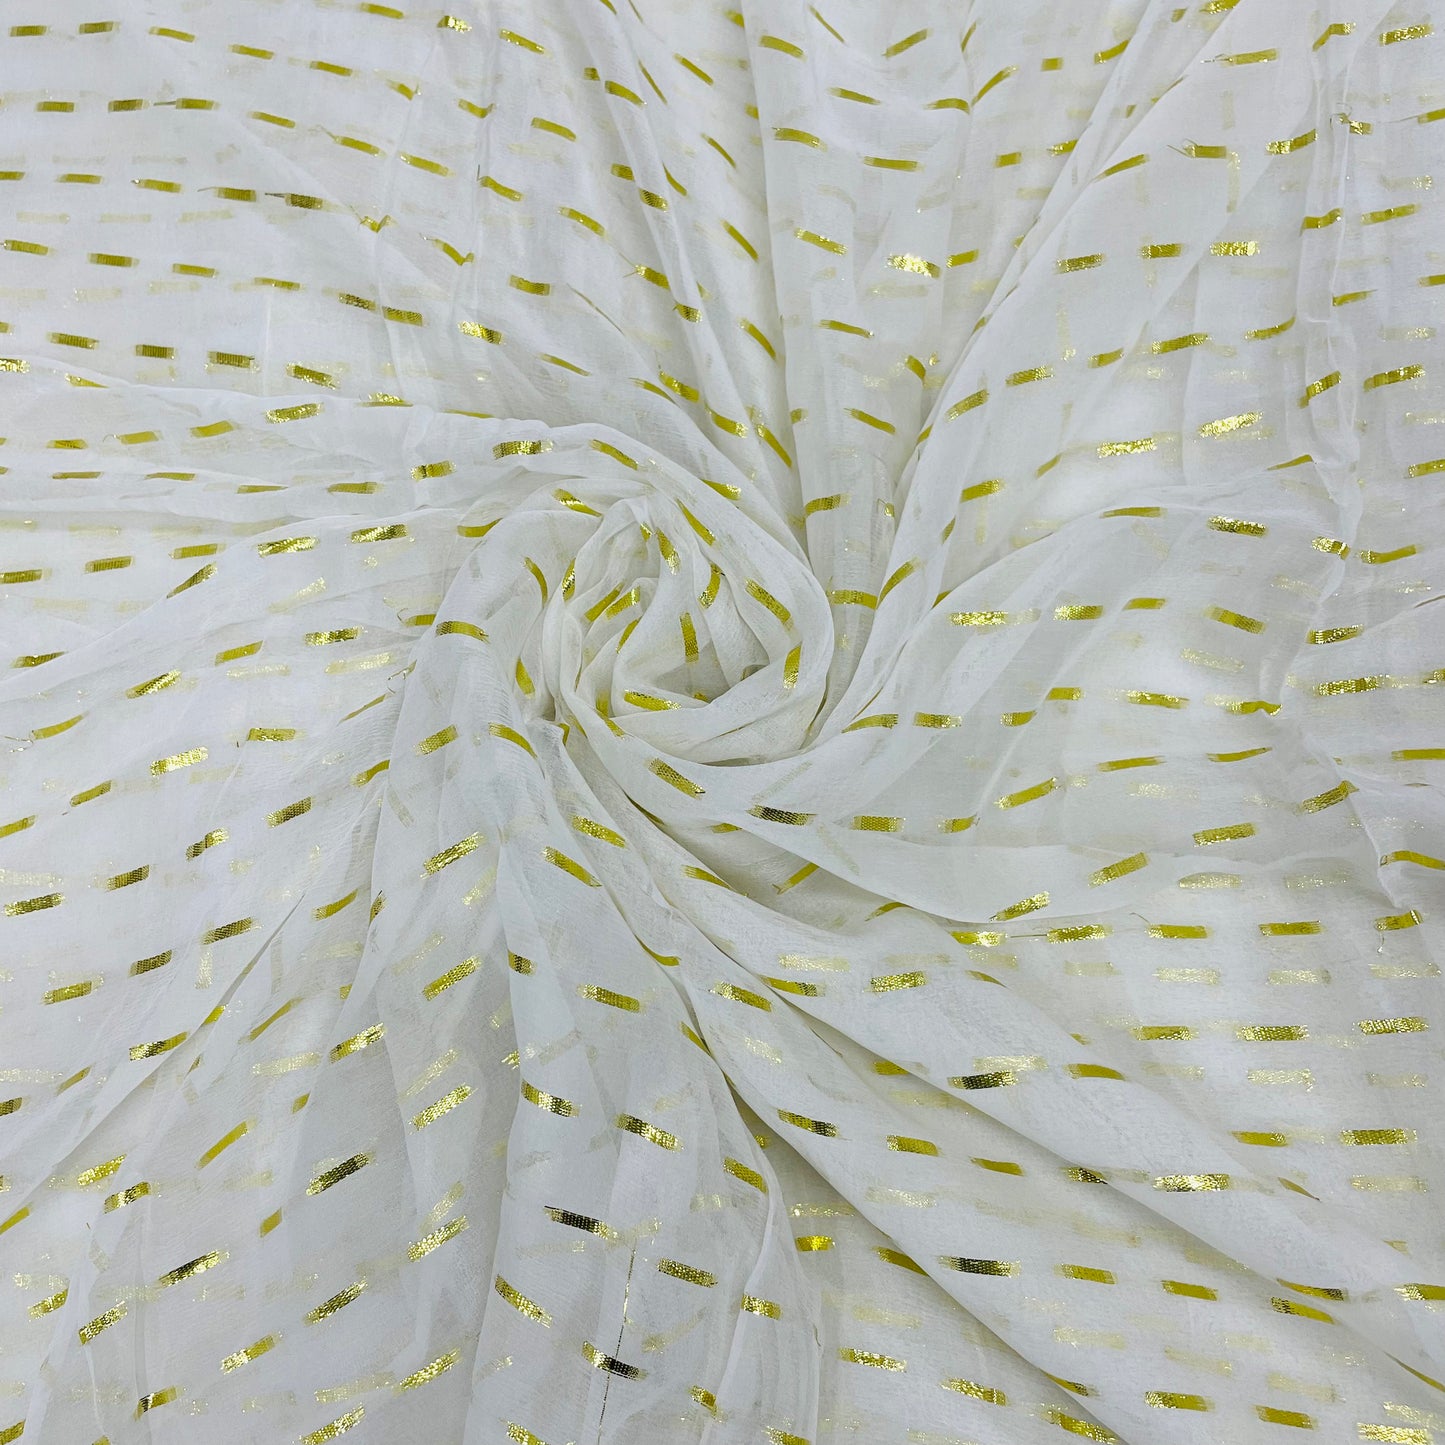 White with Golden Lurex Stripes Georgette Jacquard Dyeable Fabric